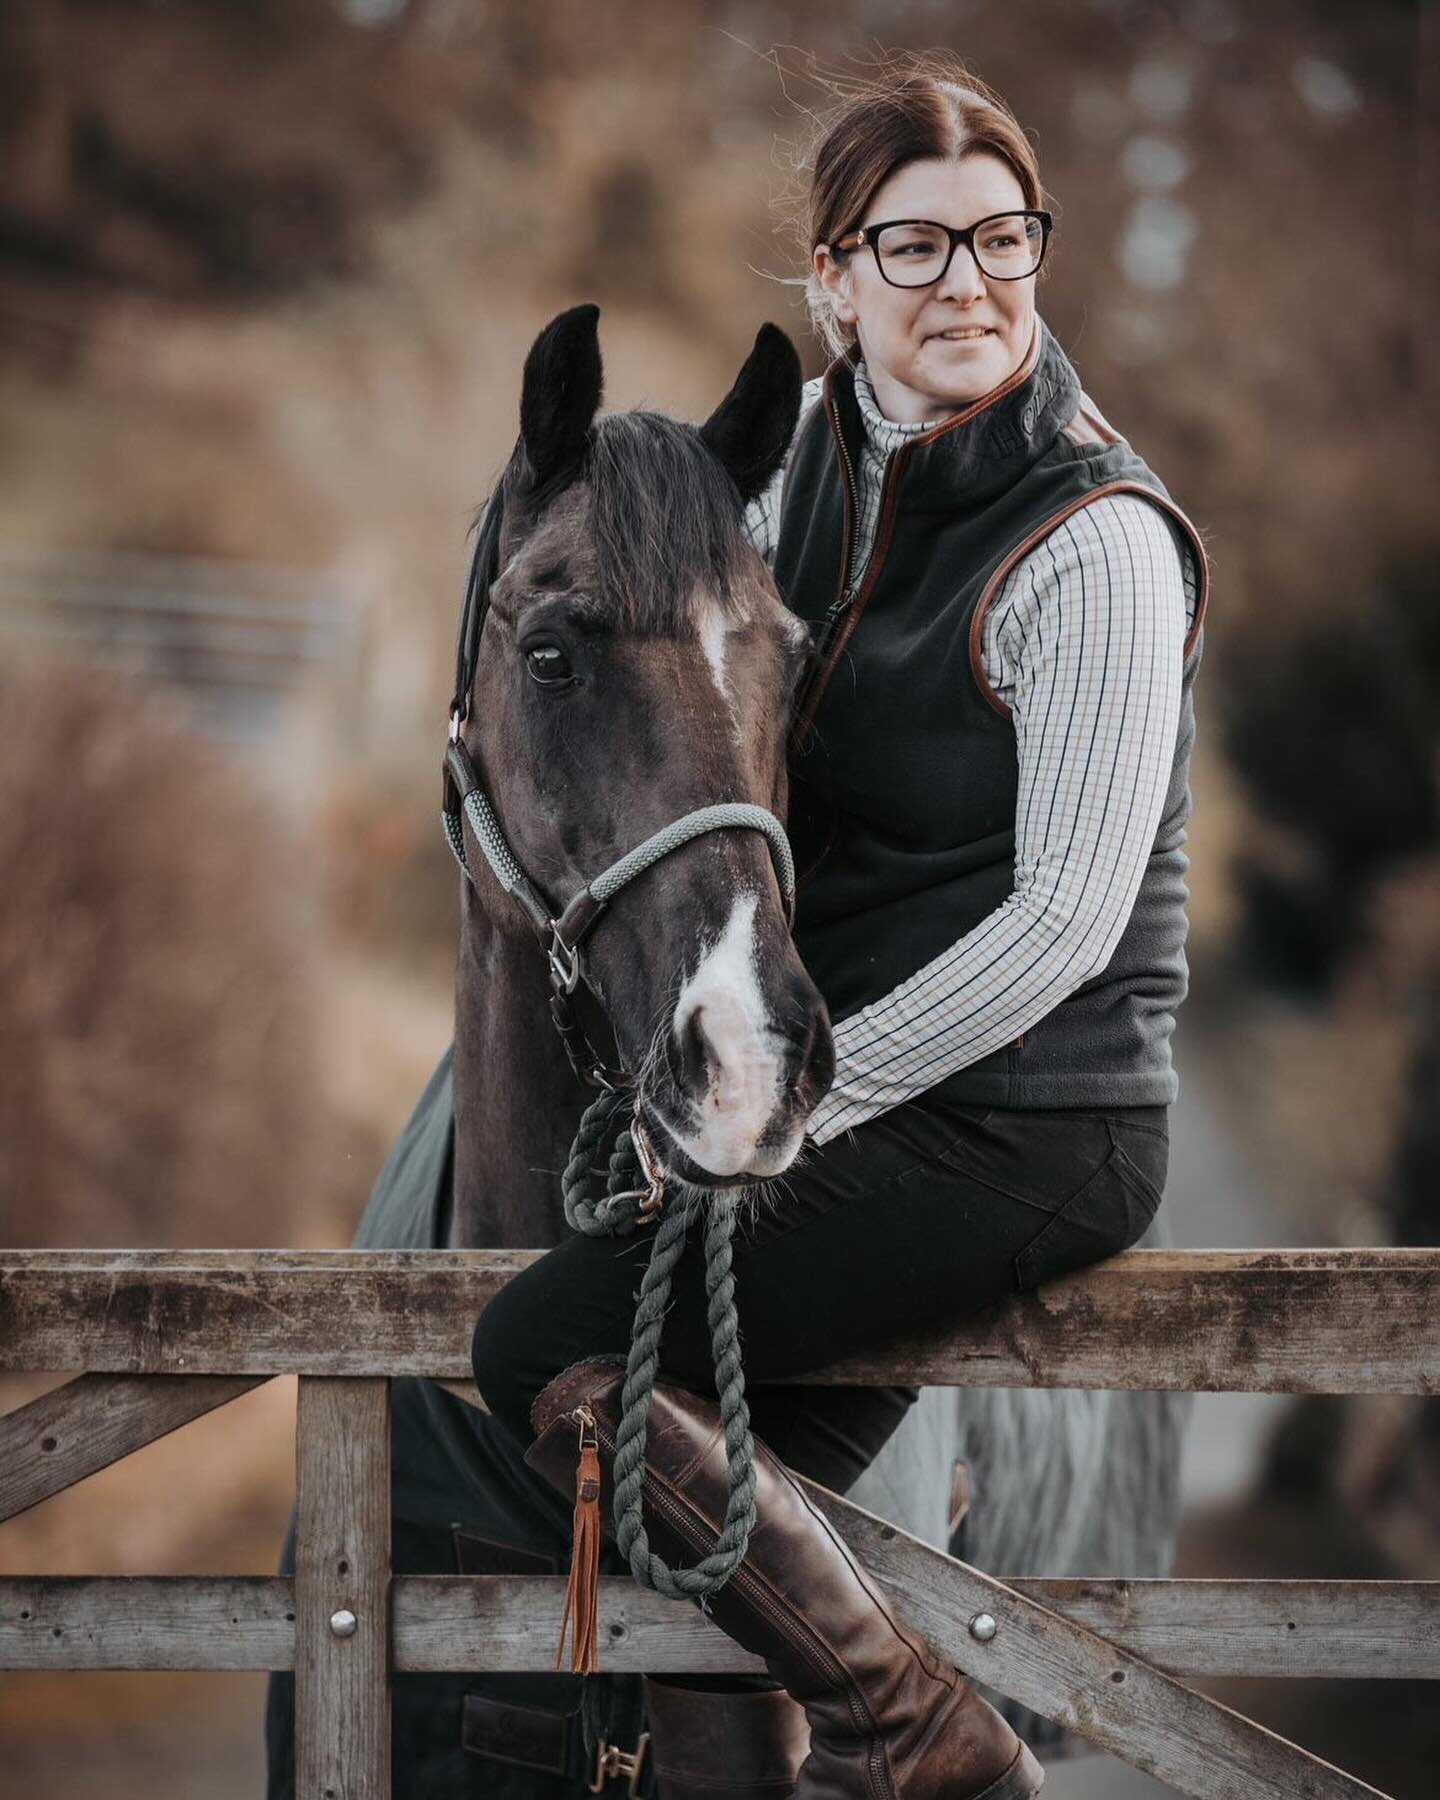 Equine post ✉️ How trauma shows up in horses 🐎 

🐎Weaning-
Horses who deal with anxiety and abandonment (being left alone) have unhealed wounds from the loss and heartache they experienced at weaning time. Not all horses are affected by weaning, bu